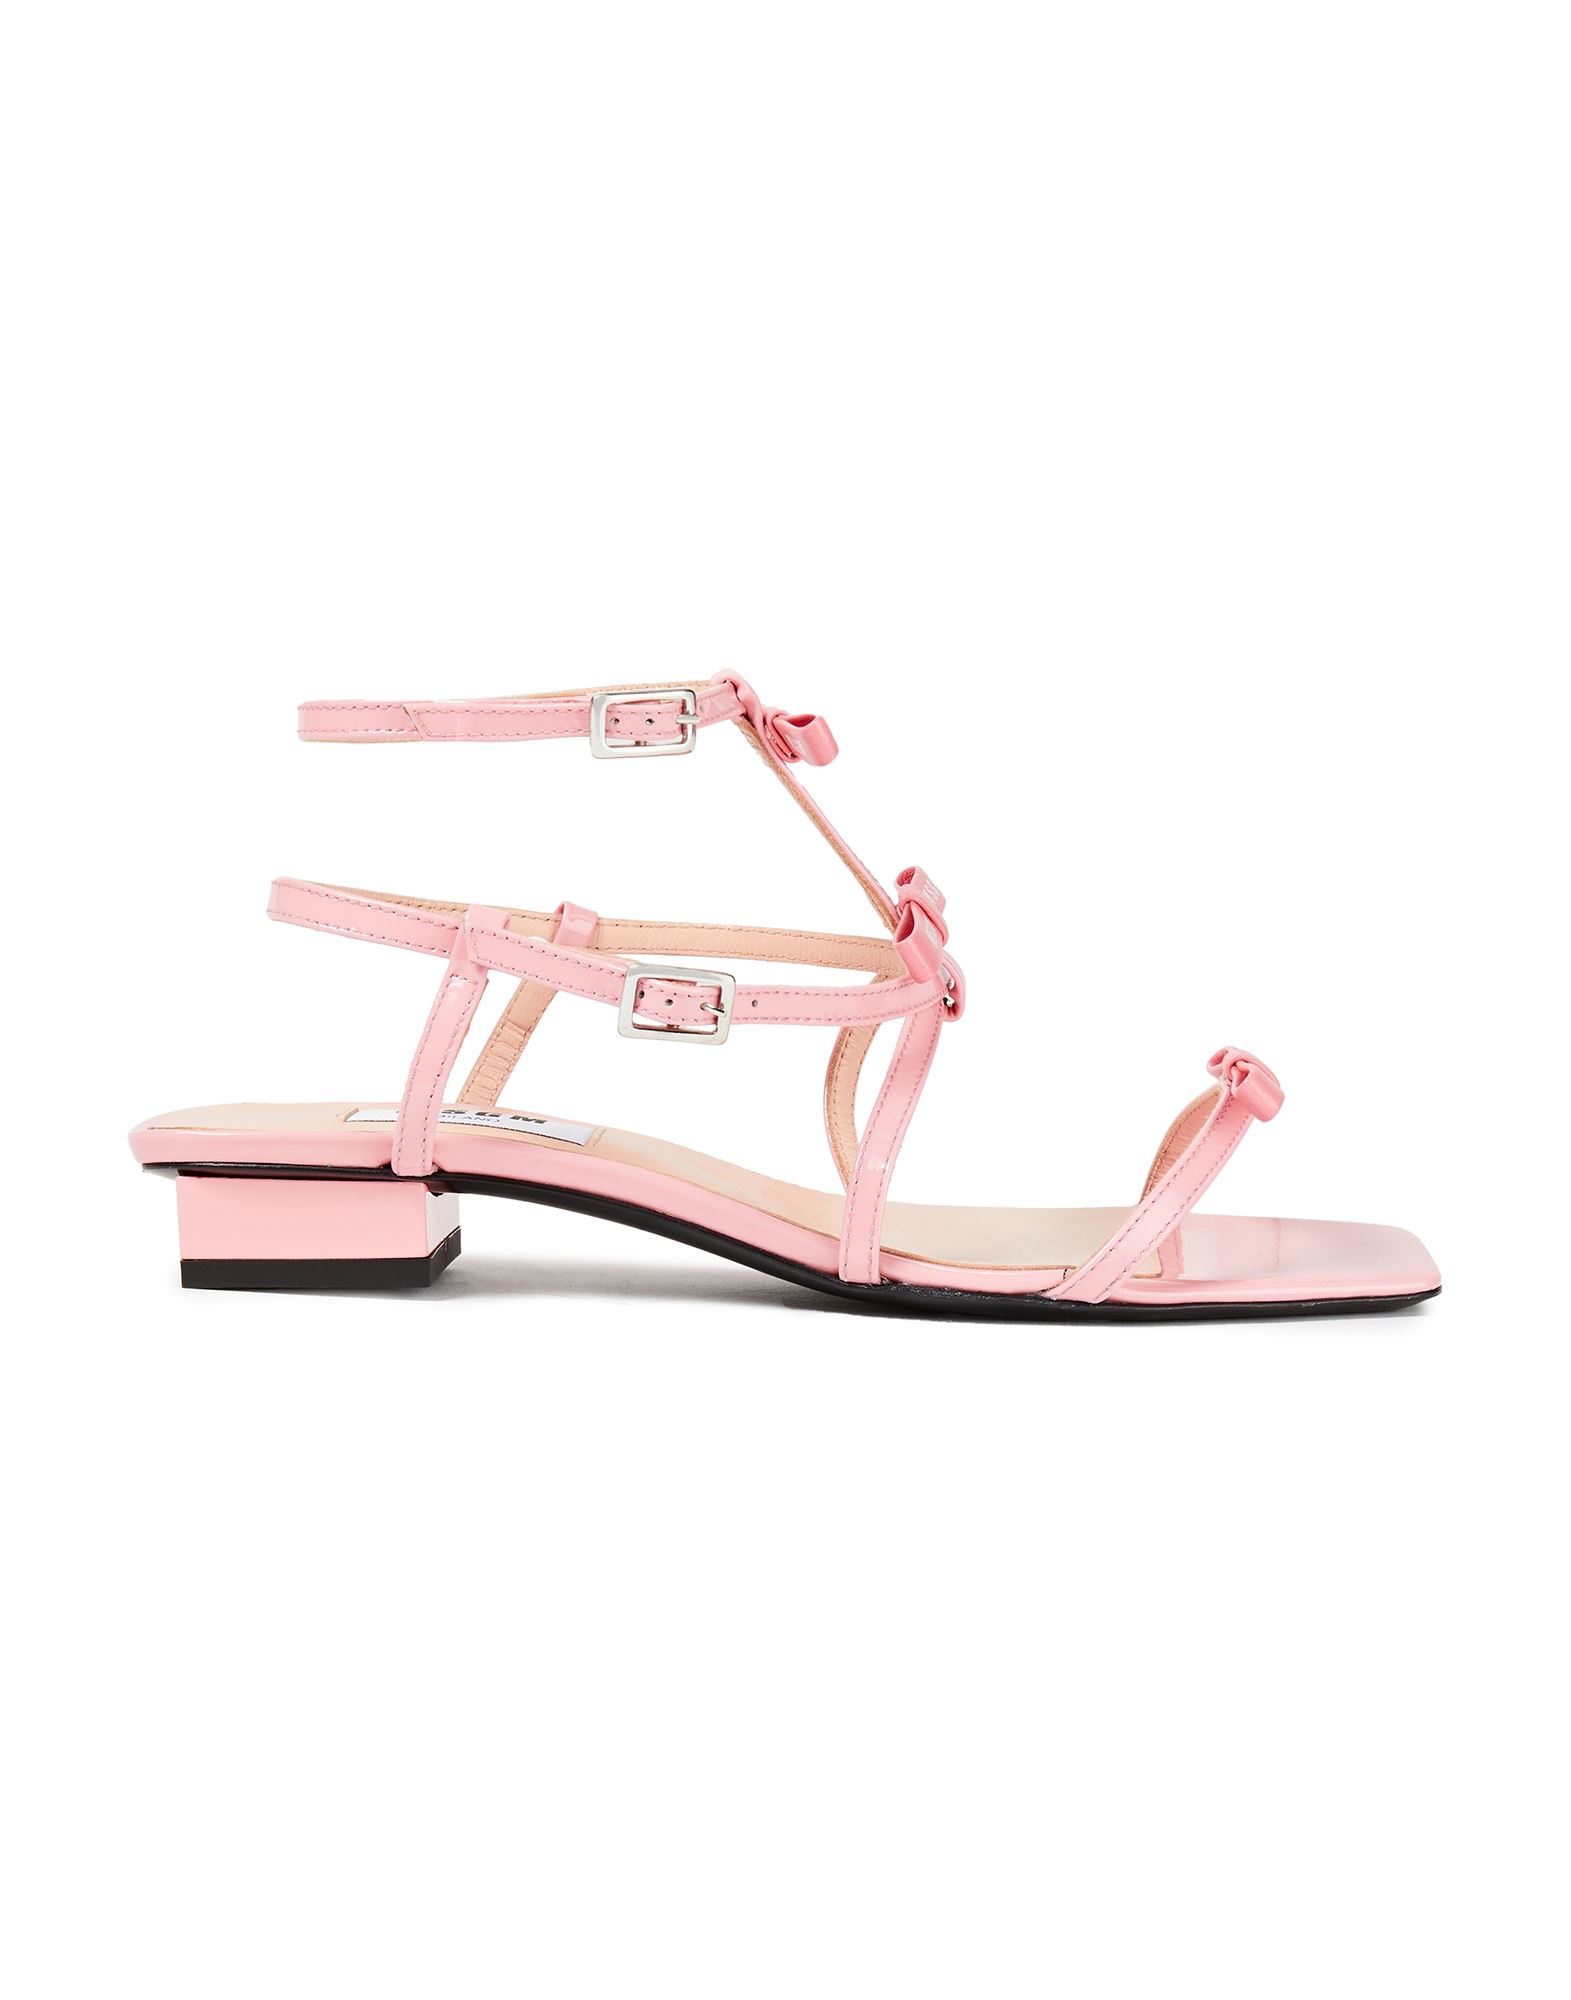 Msgm Sandals In Light Pink